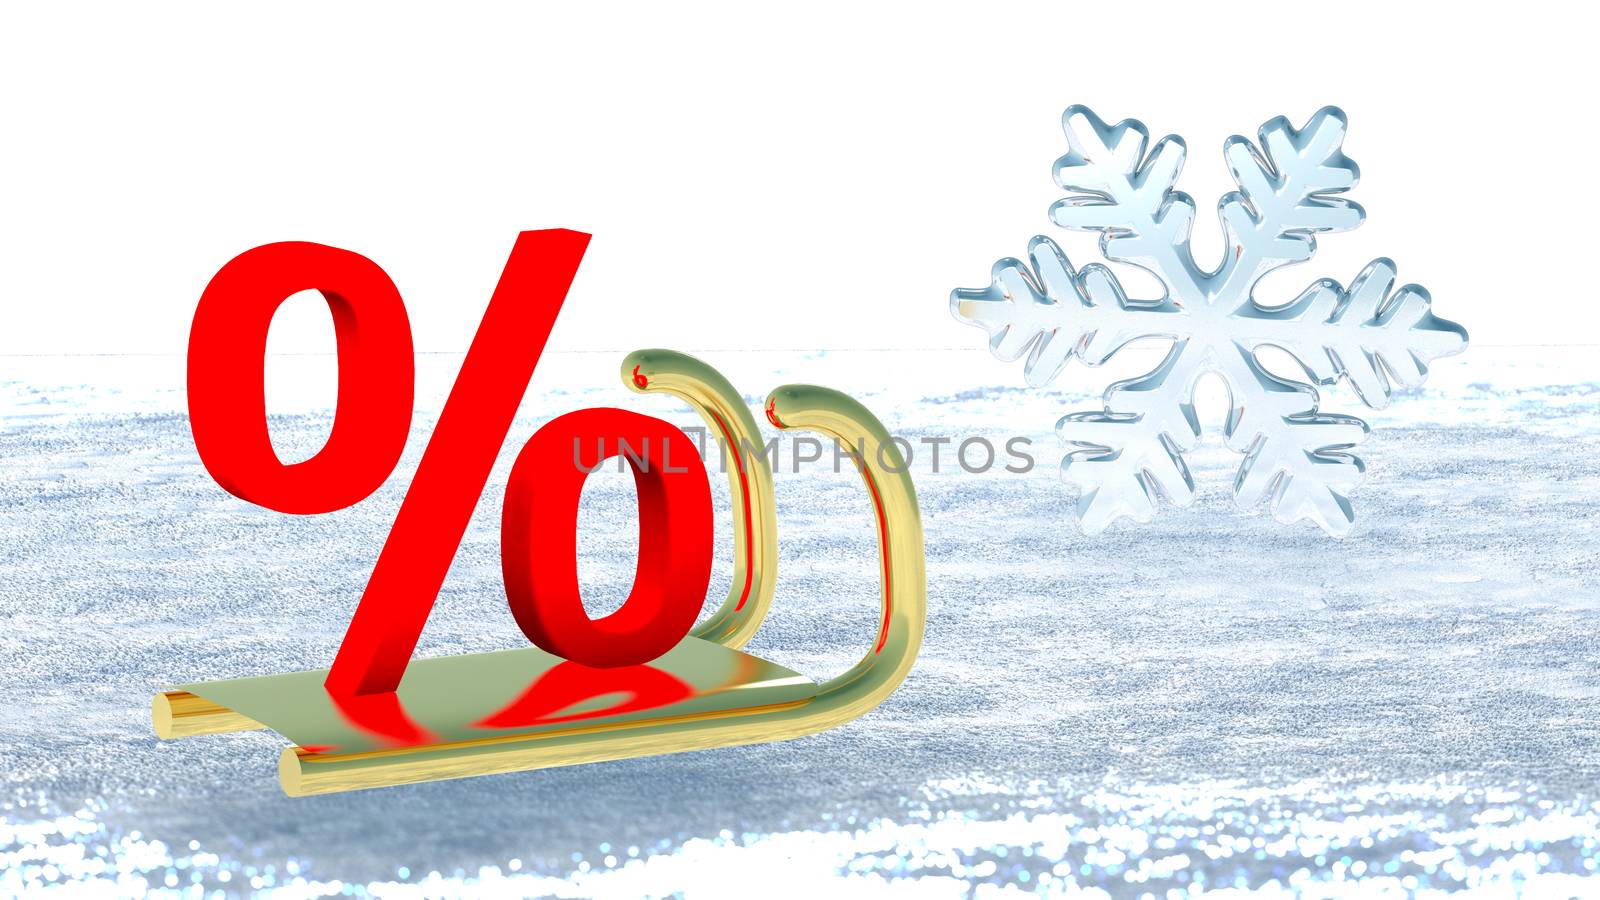 A percent symbol on Santa Claus sleigh that symbolizes winter promotions